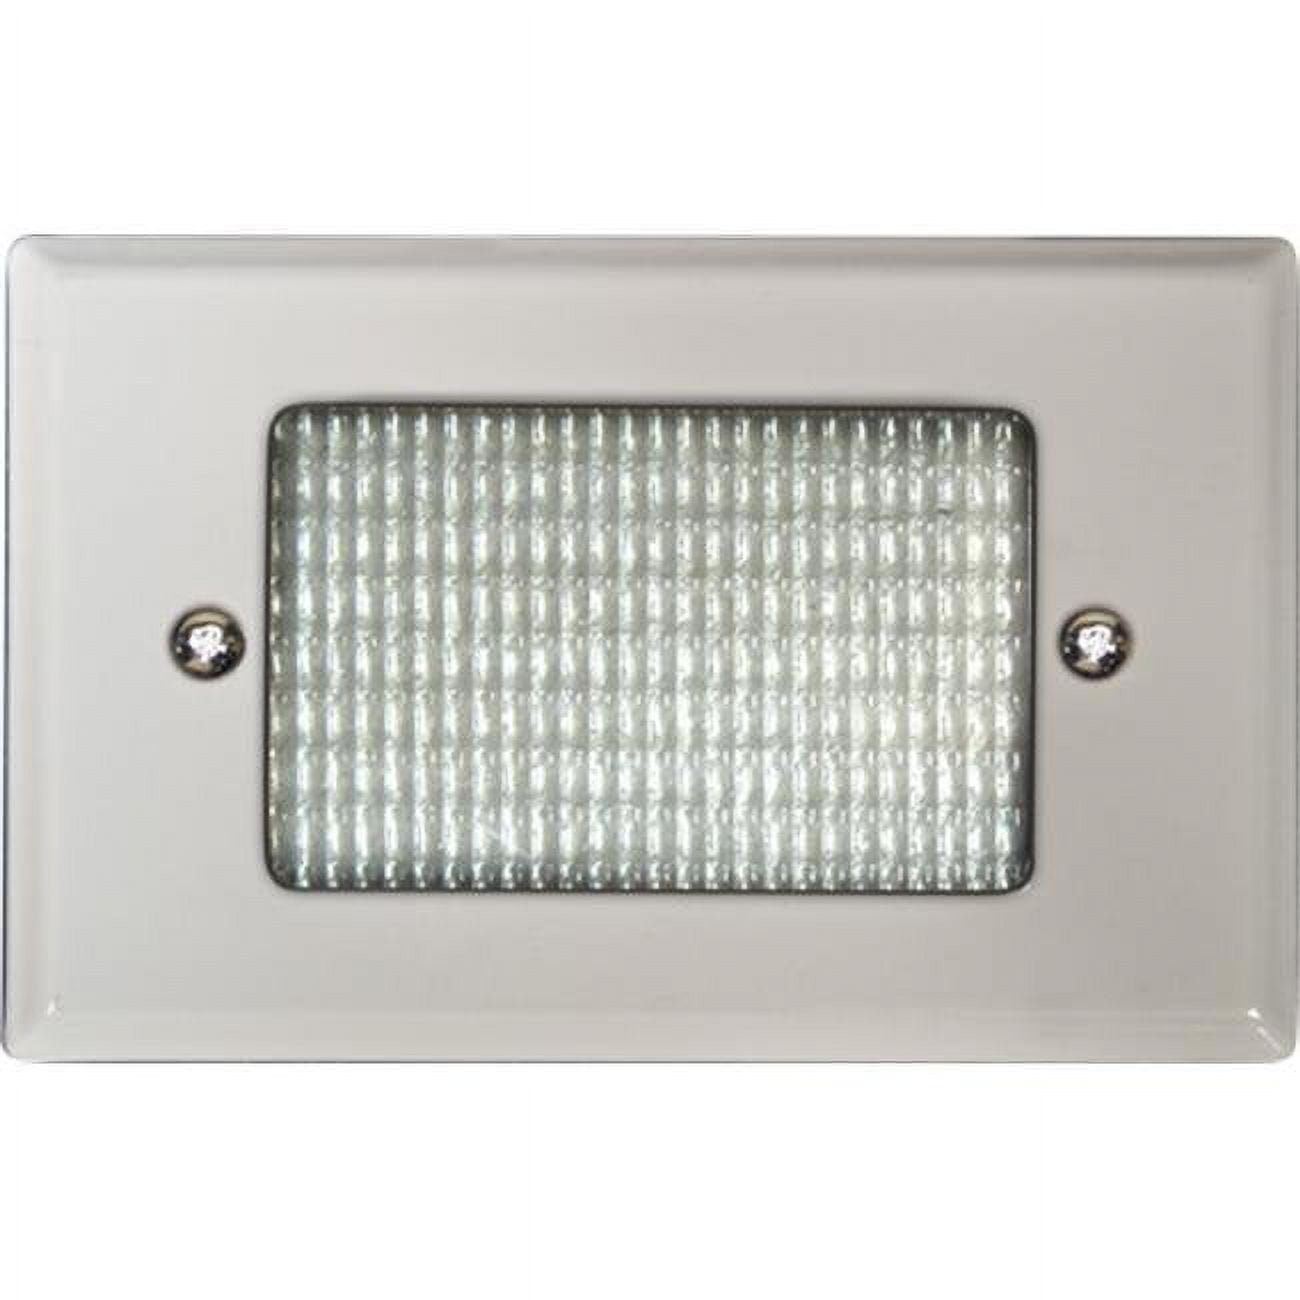 Picture of Dabmar Lighting LV618-W Cast Aluminum Recessed Open Face Brick, Step & Wall Light, White - 1.95 x 4.83 x 3.10 in.